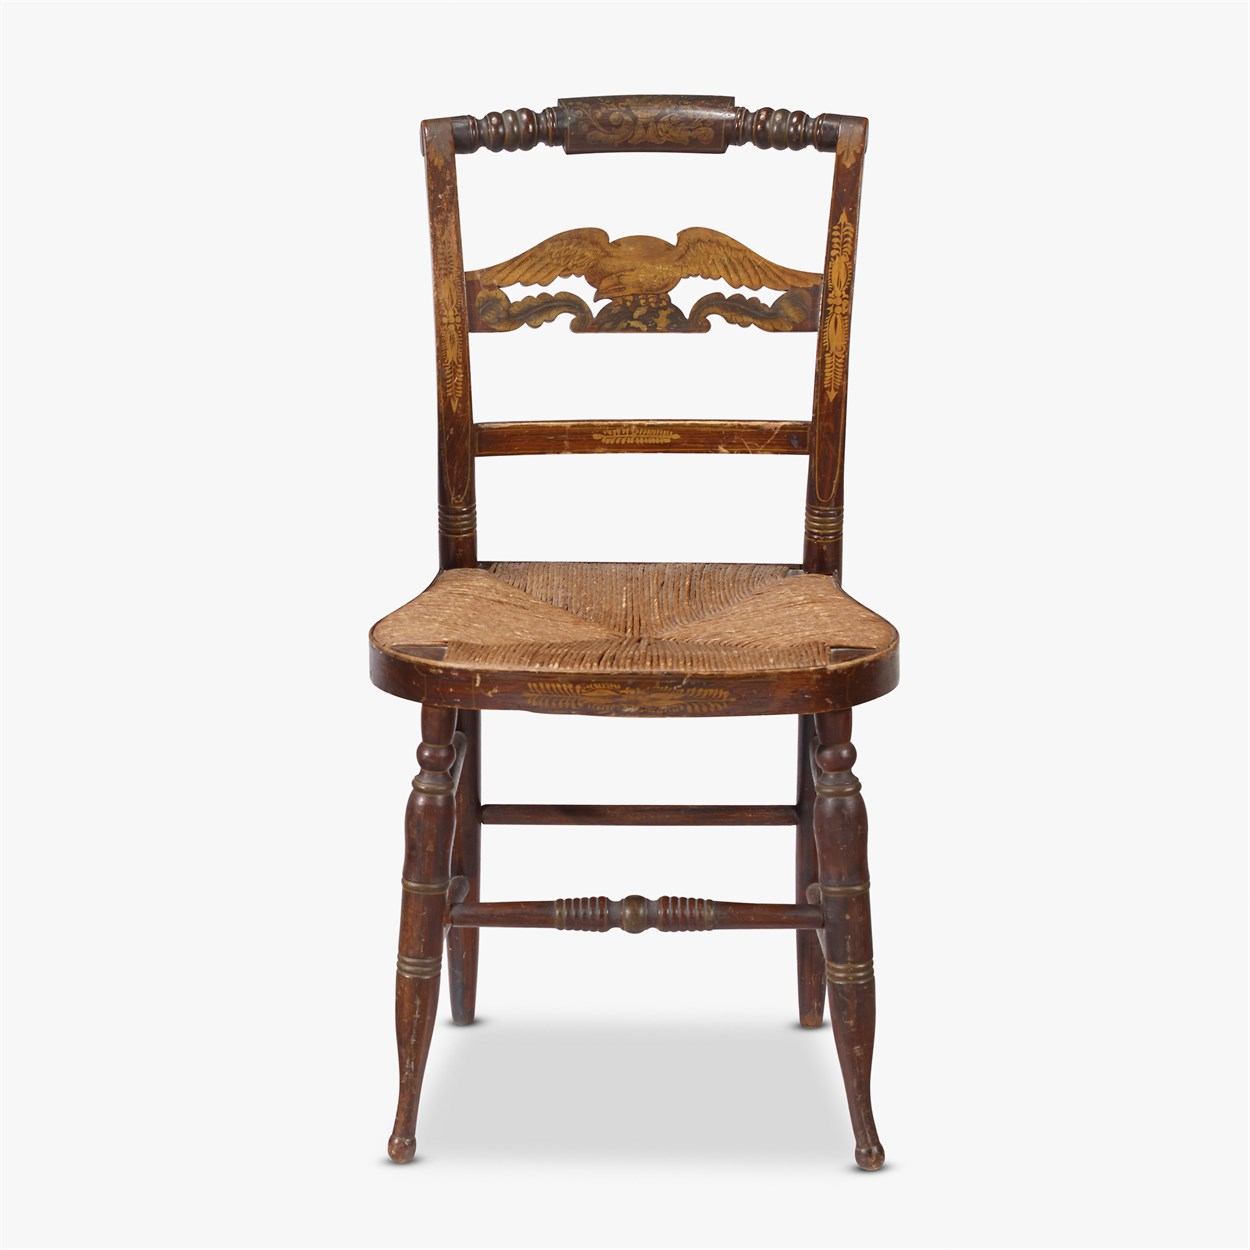 Lot 11 - Rosewood grain painted and gilt-stenciled rush seat fancy chair